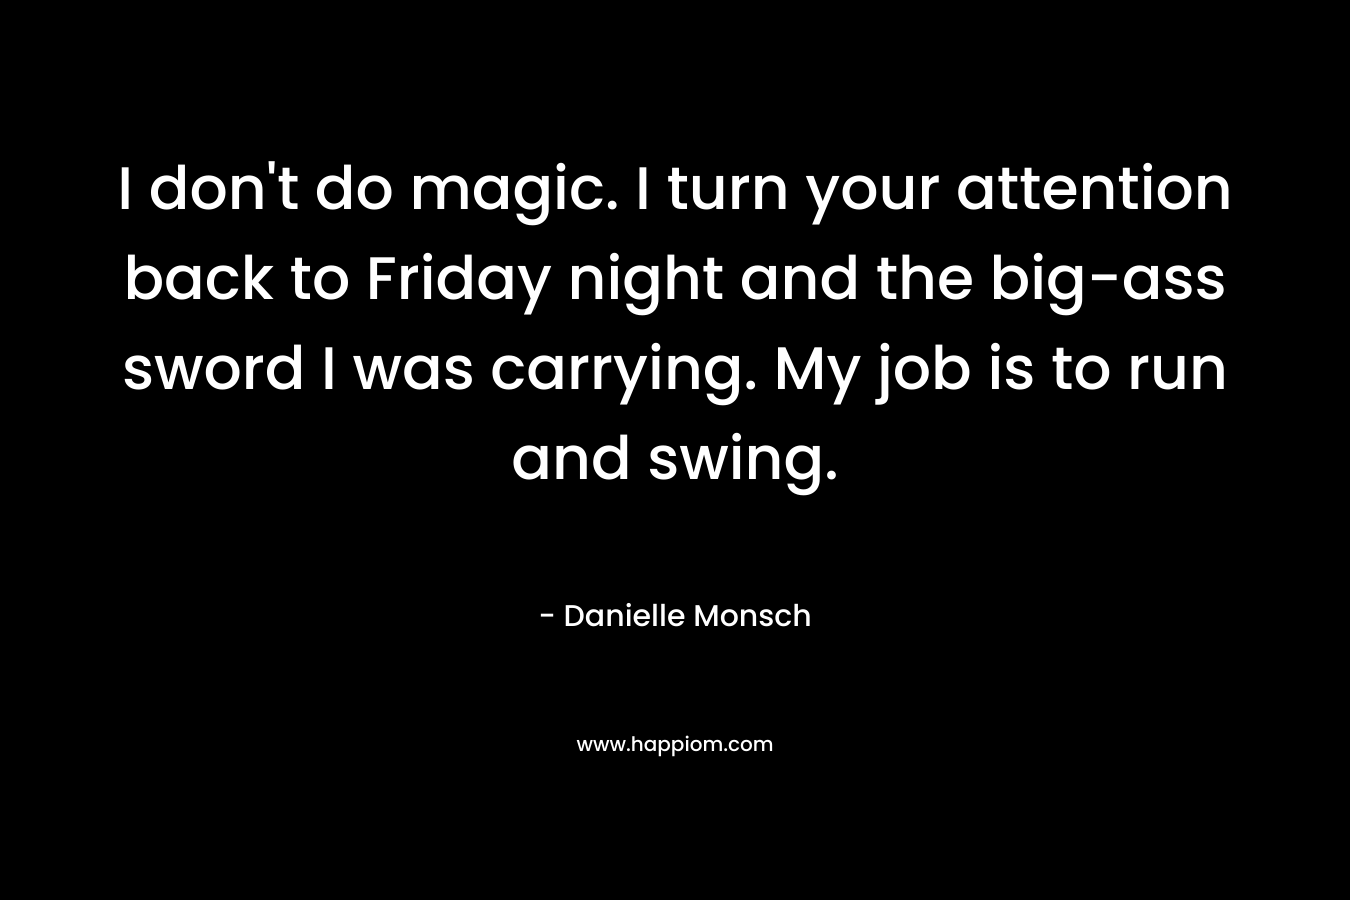 I don't do magic. I turn your attention back to Friday night and the big-ass sword I was carrying. My job is to run and swing.